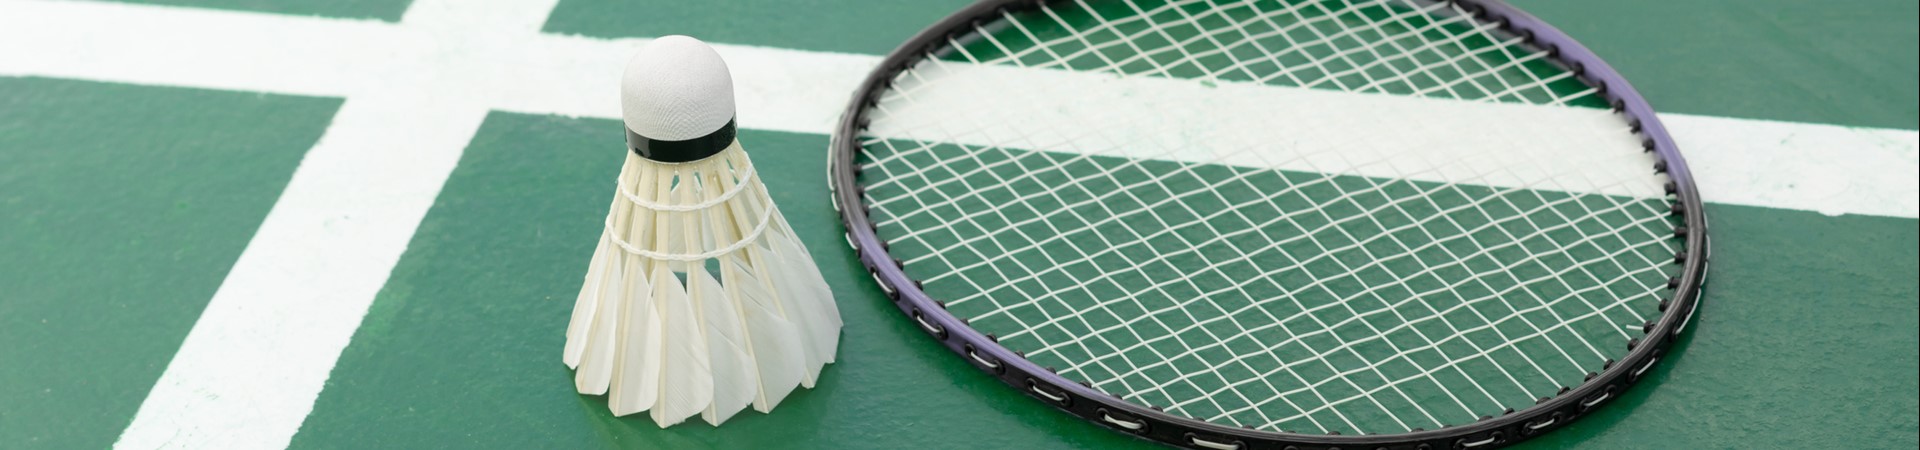 Badminton racket and shuttlecocks on a sports courts